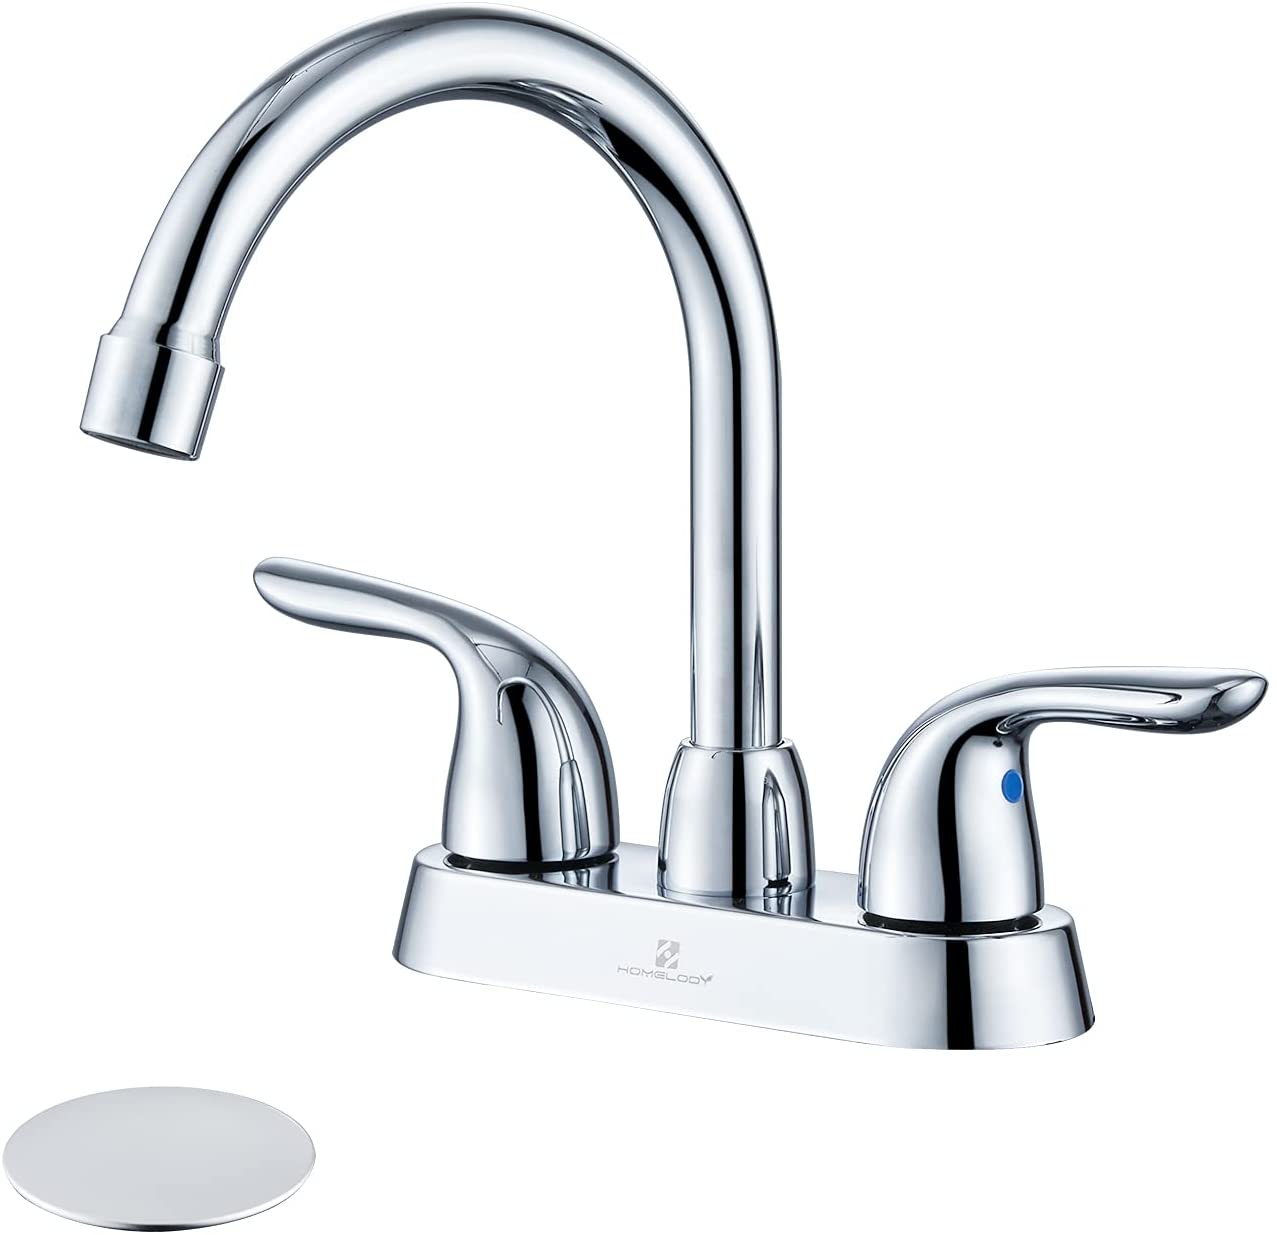 Homelody 4 Inch Centerset Bathroom Sink Faucet Chrome